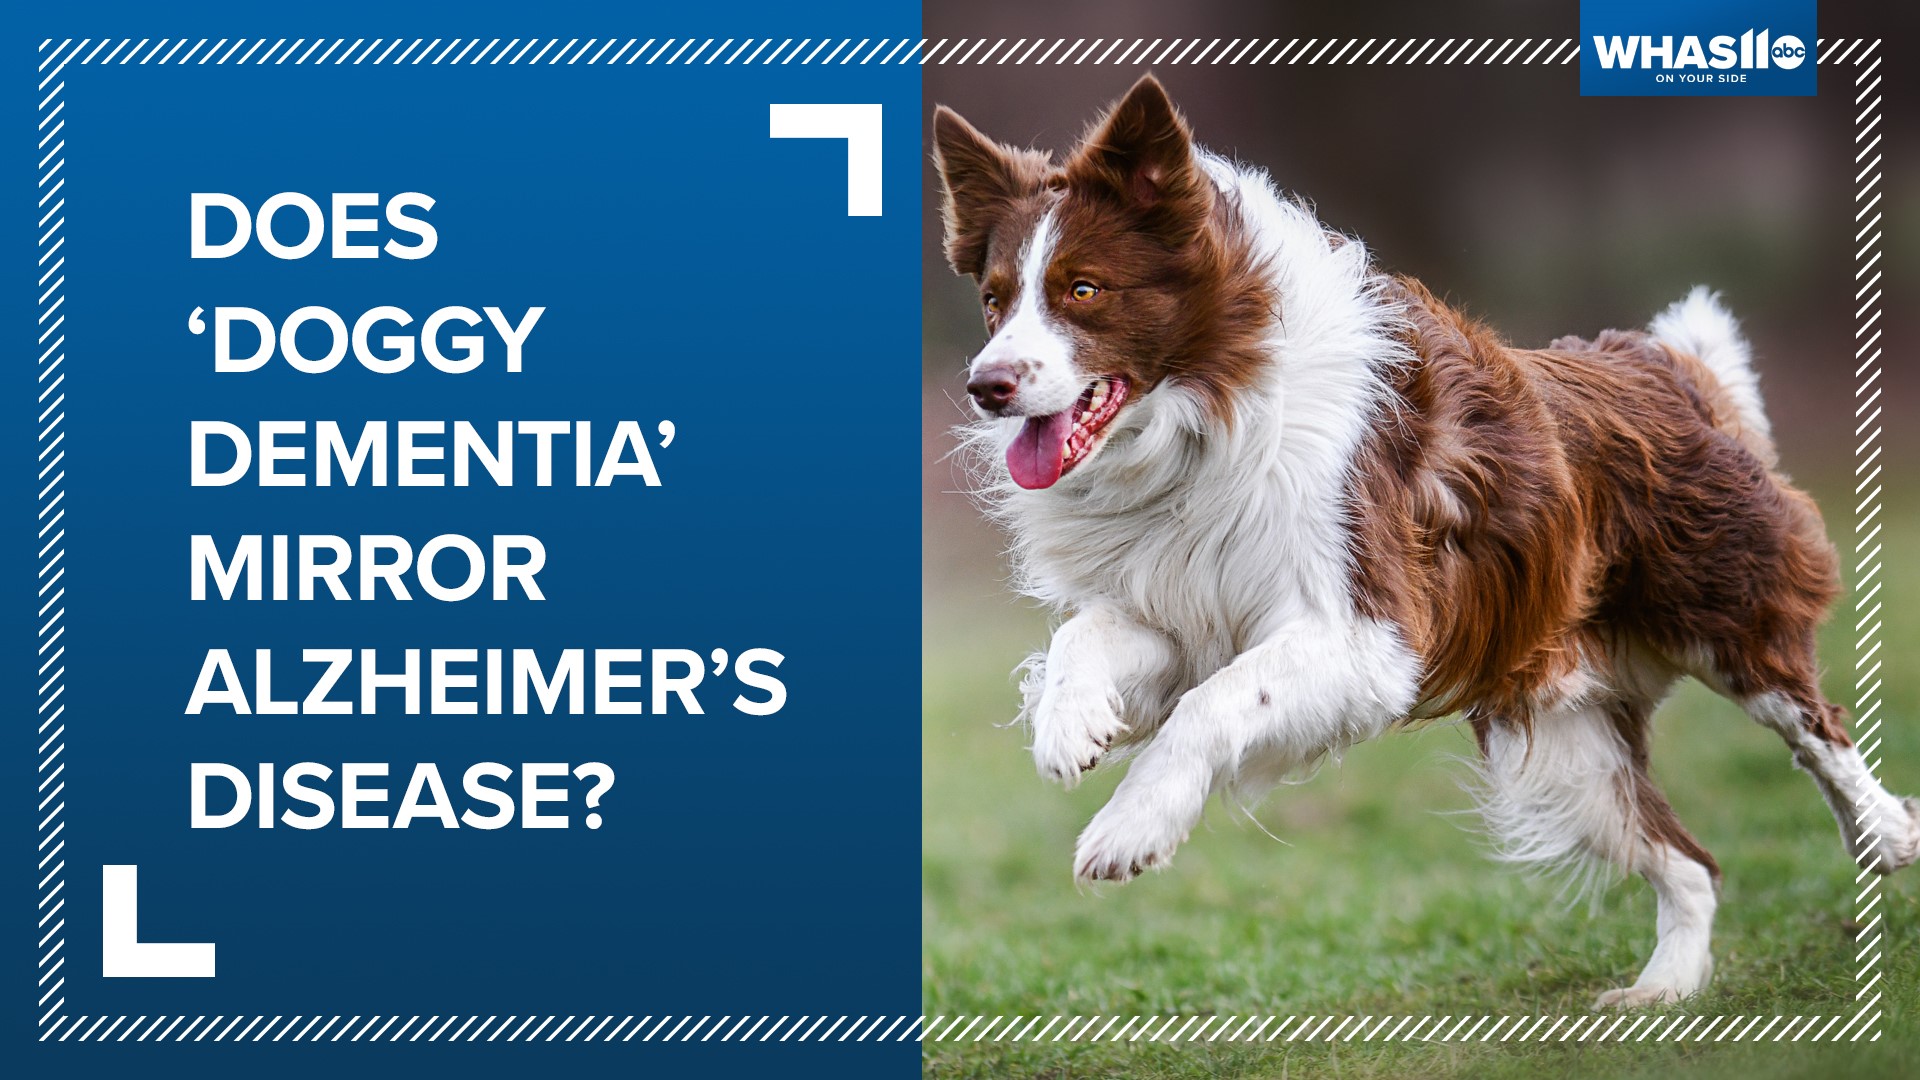 According to a new study, researchers say diagnosing dementia in dogs can also help humans.